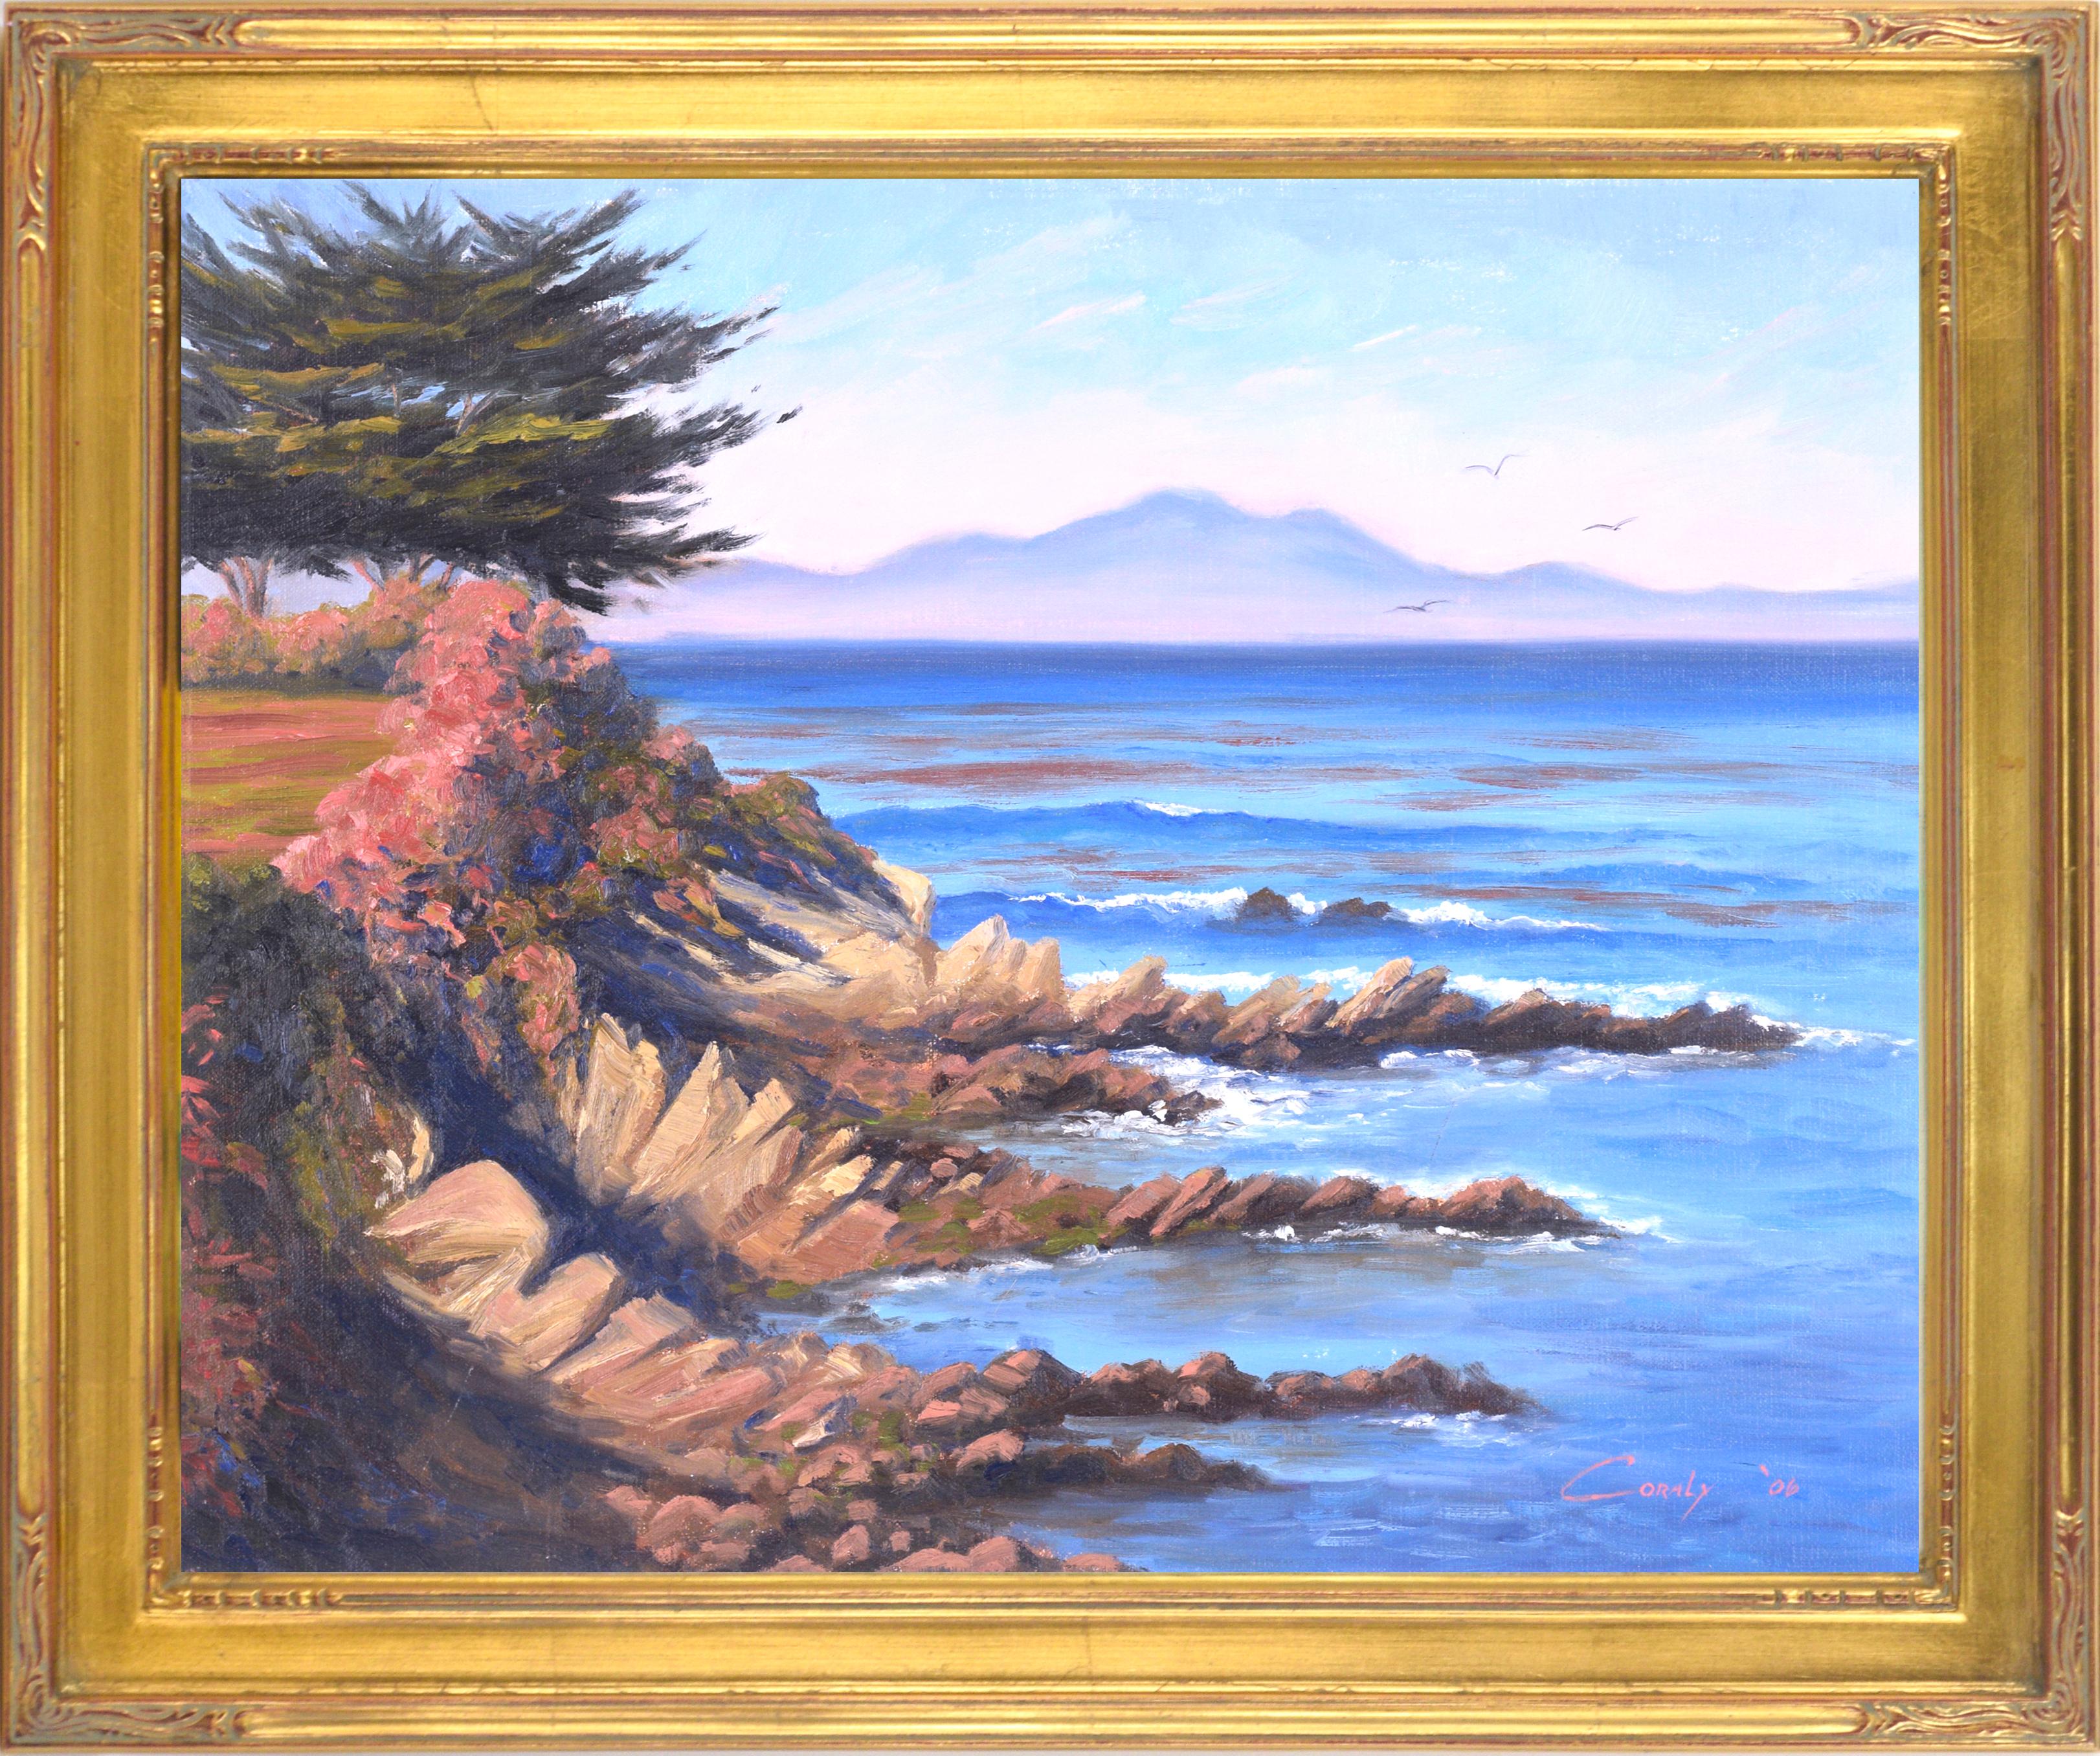 "Pacific Grove Glory" - Paysage marin rocheux